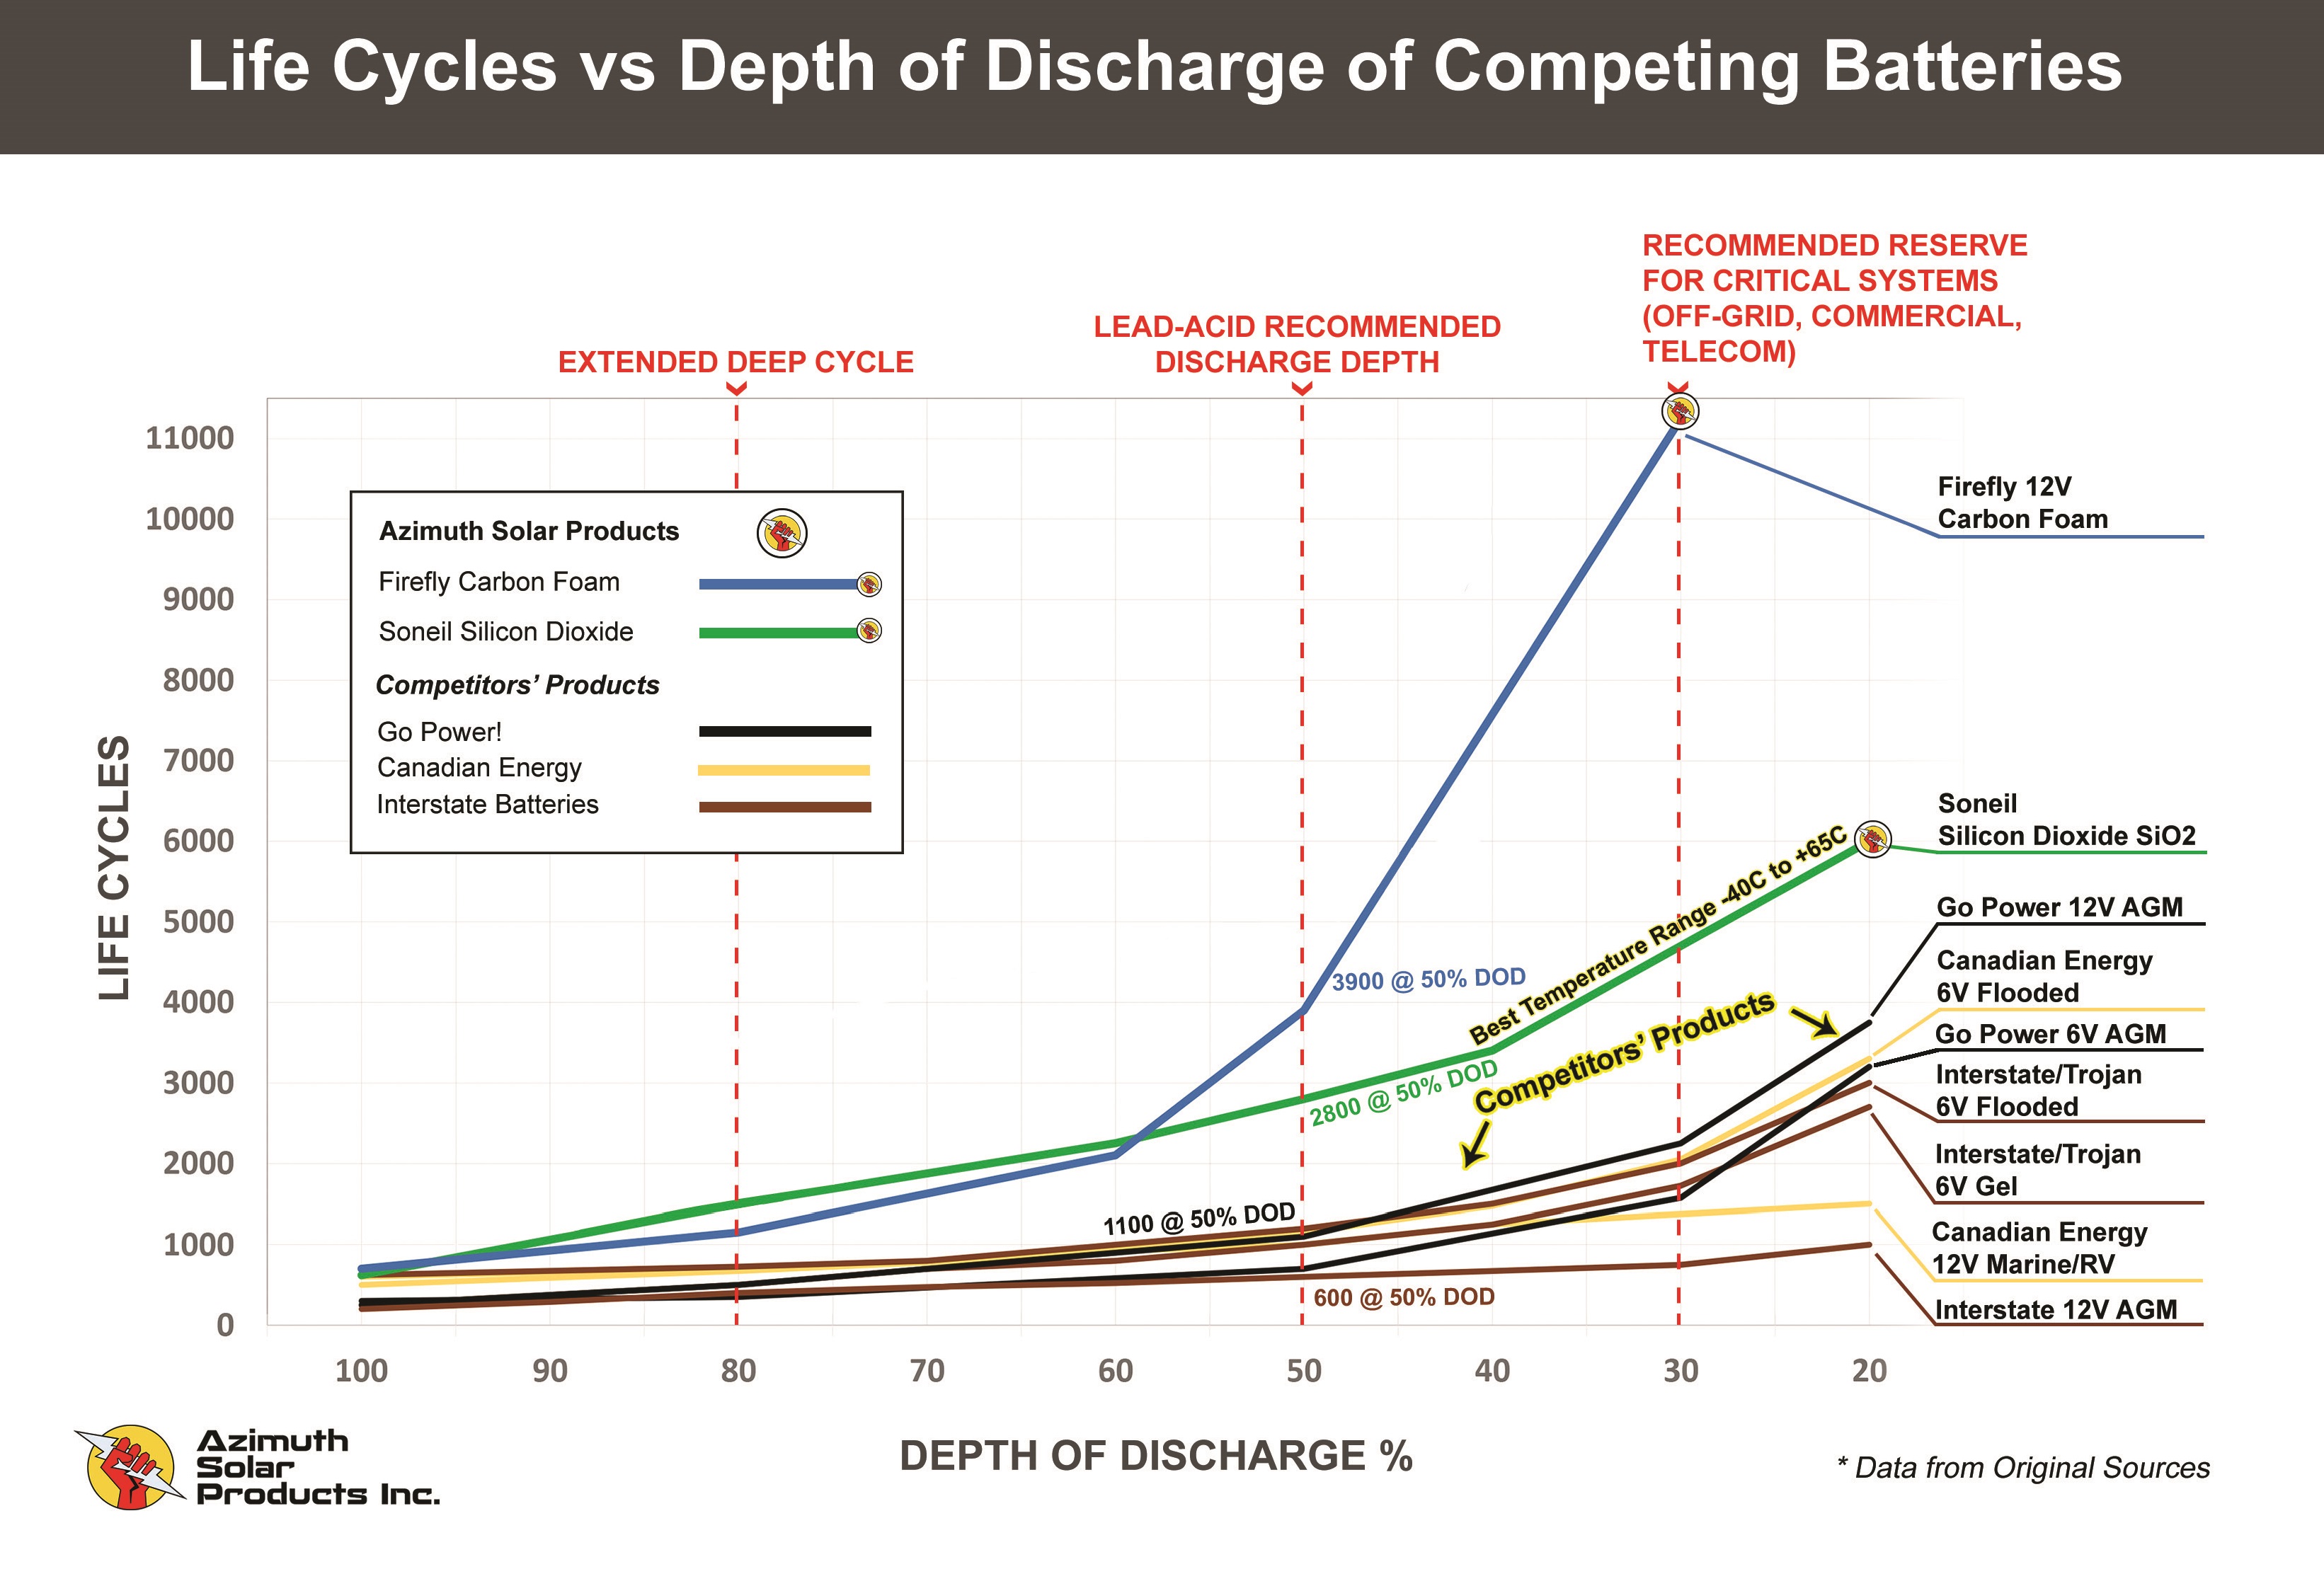 chart comparing life cycles vs DoD of competing batteries by Azimuth Solar